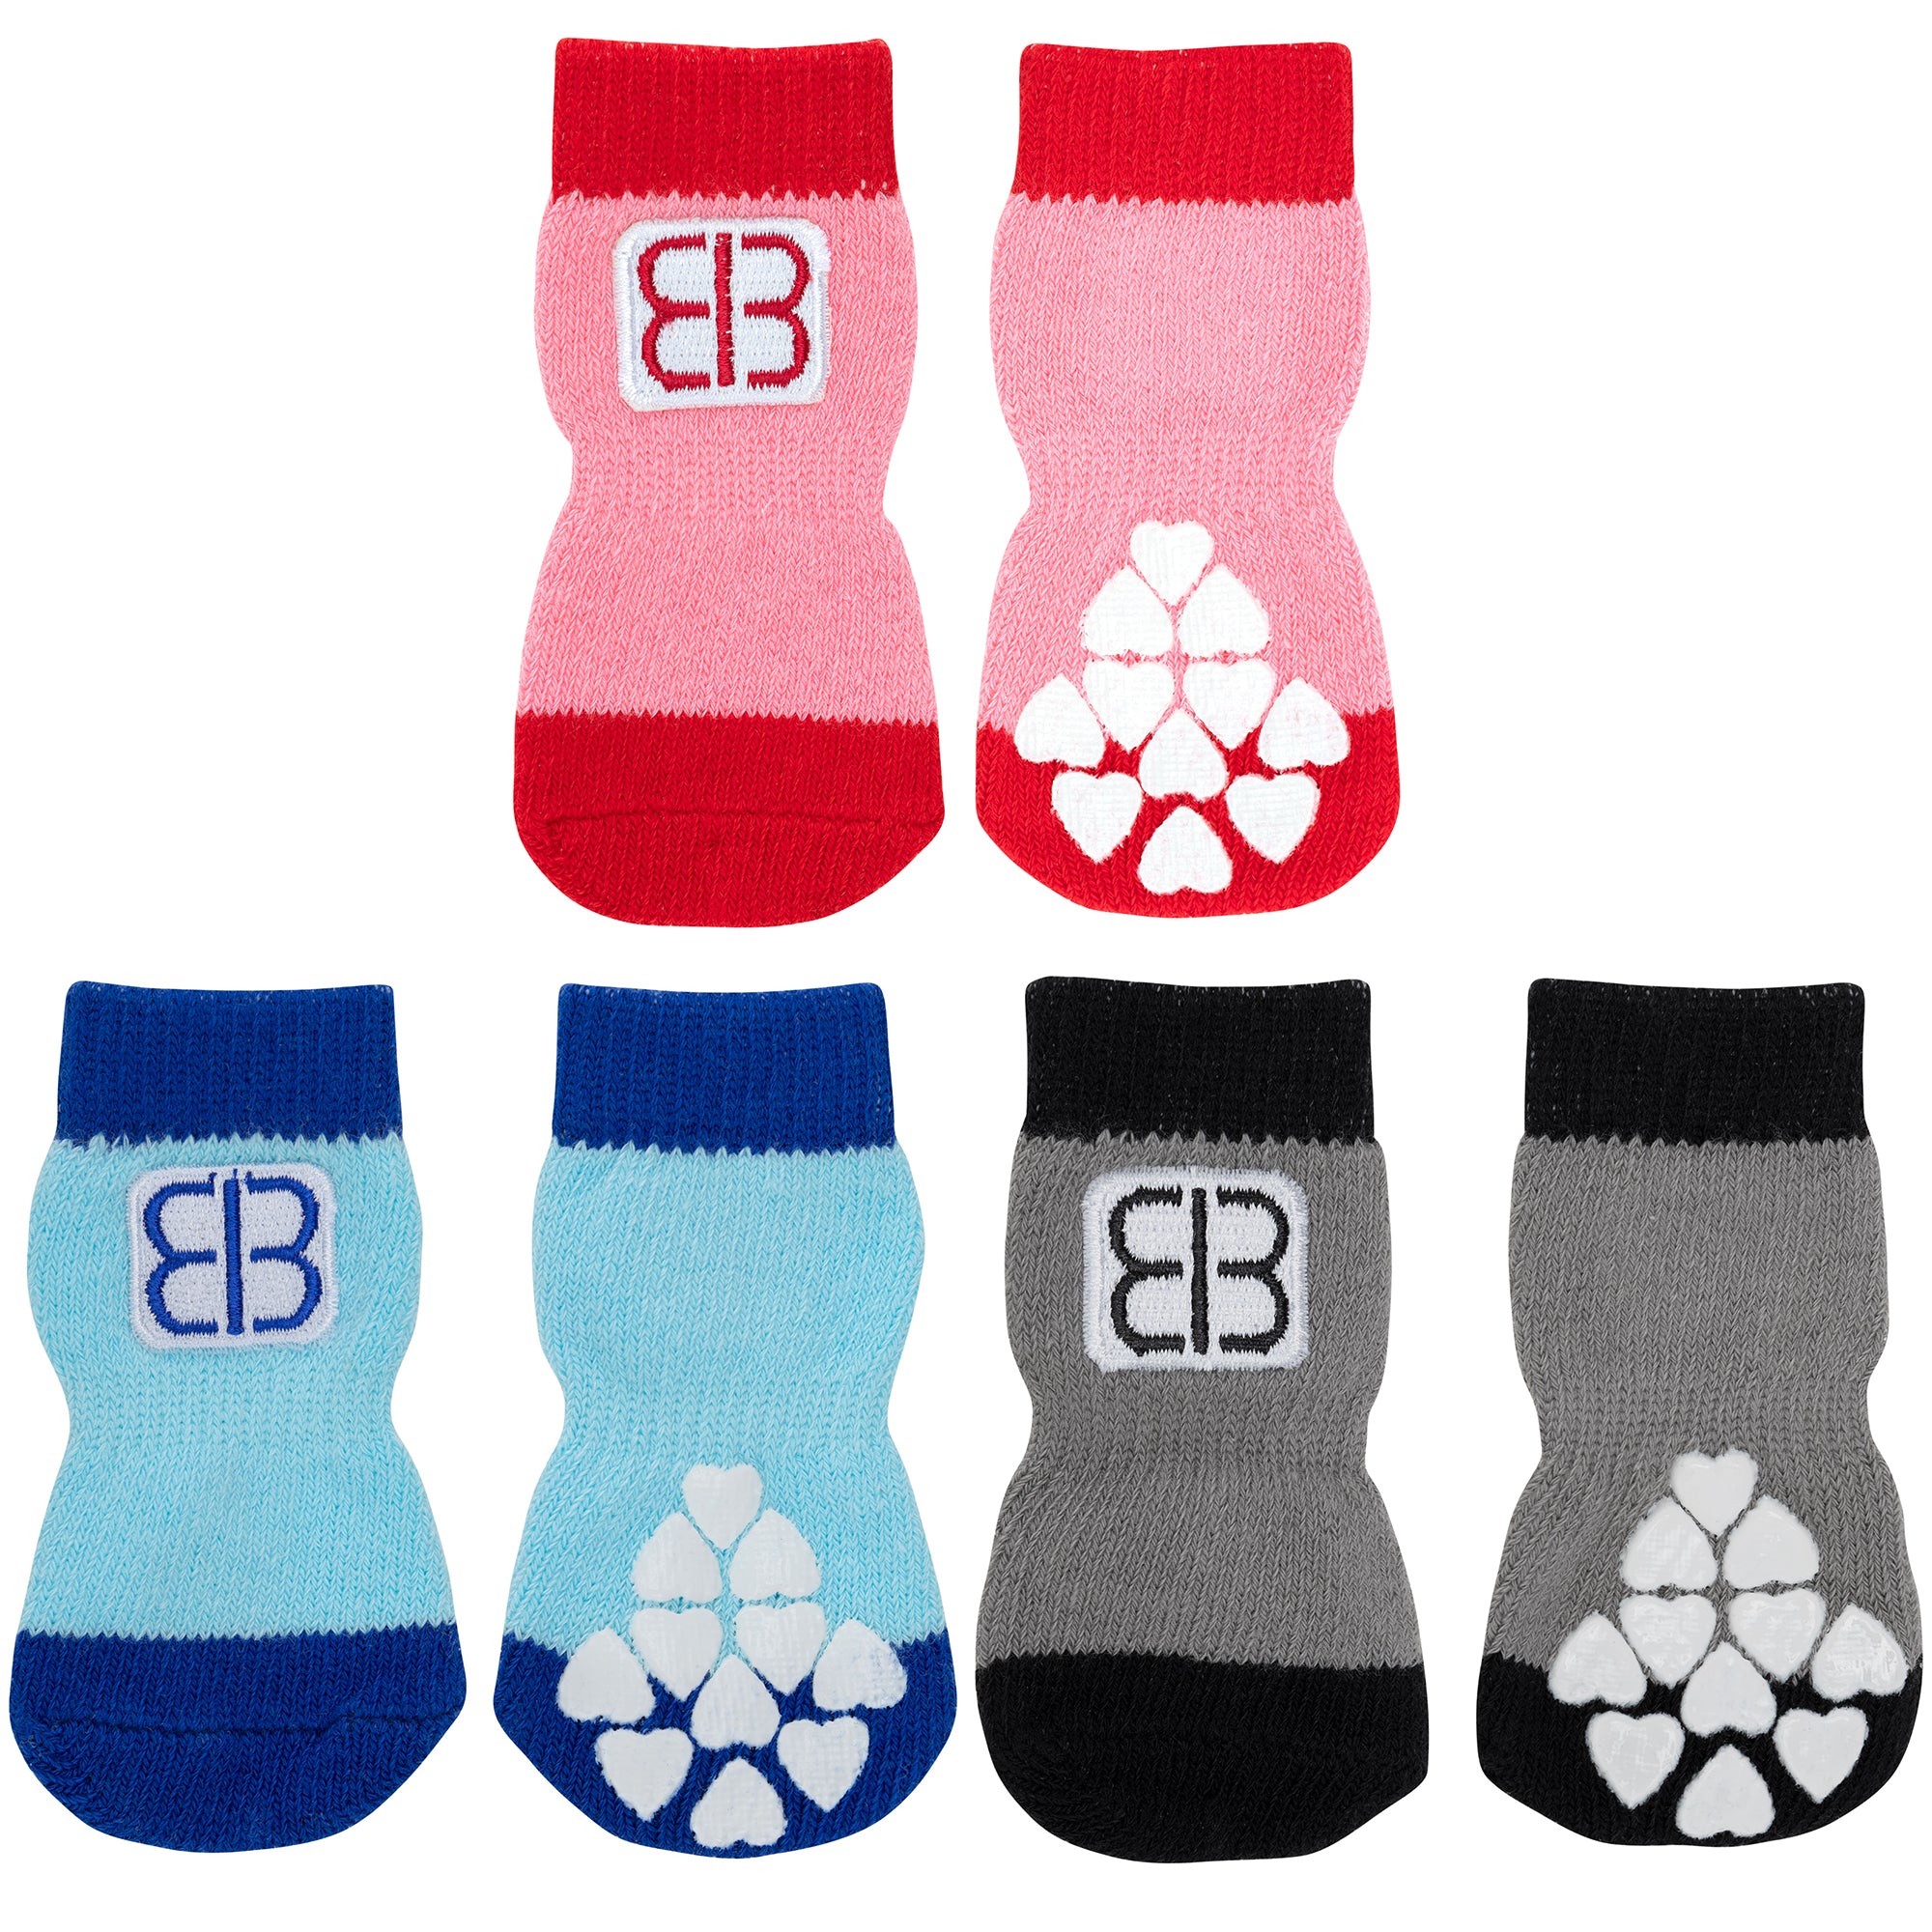 Traction Control Socks For Dogs - Red/Pink - XXL